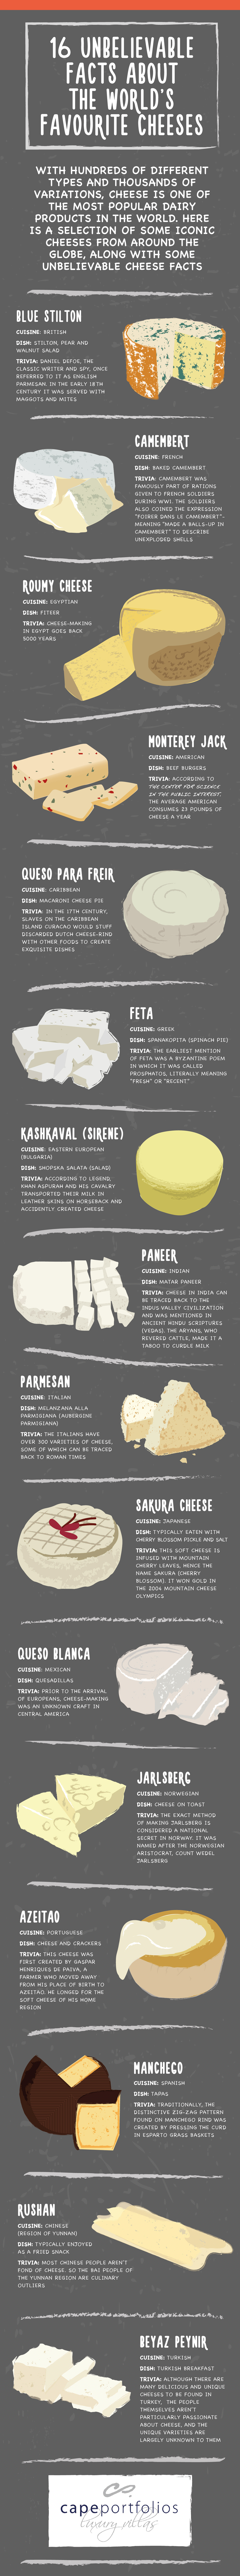 16 Cheese Facts